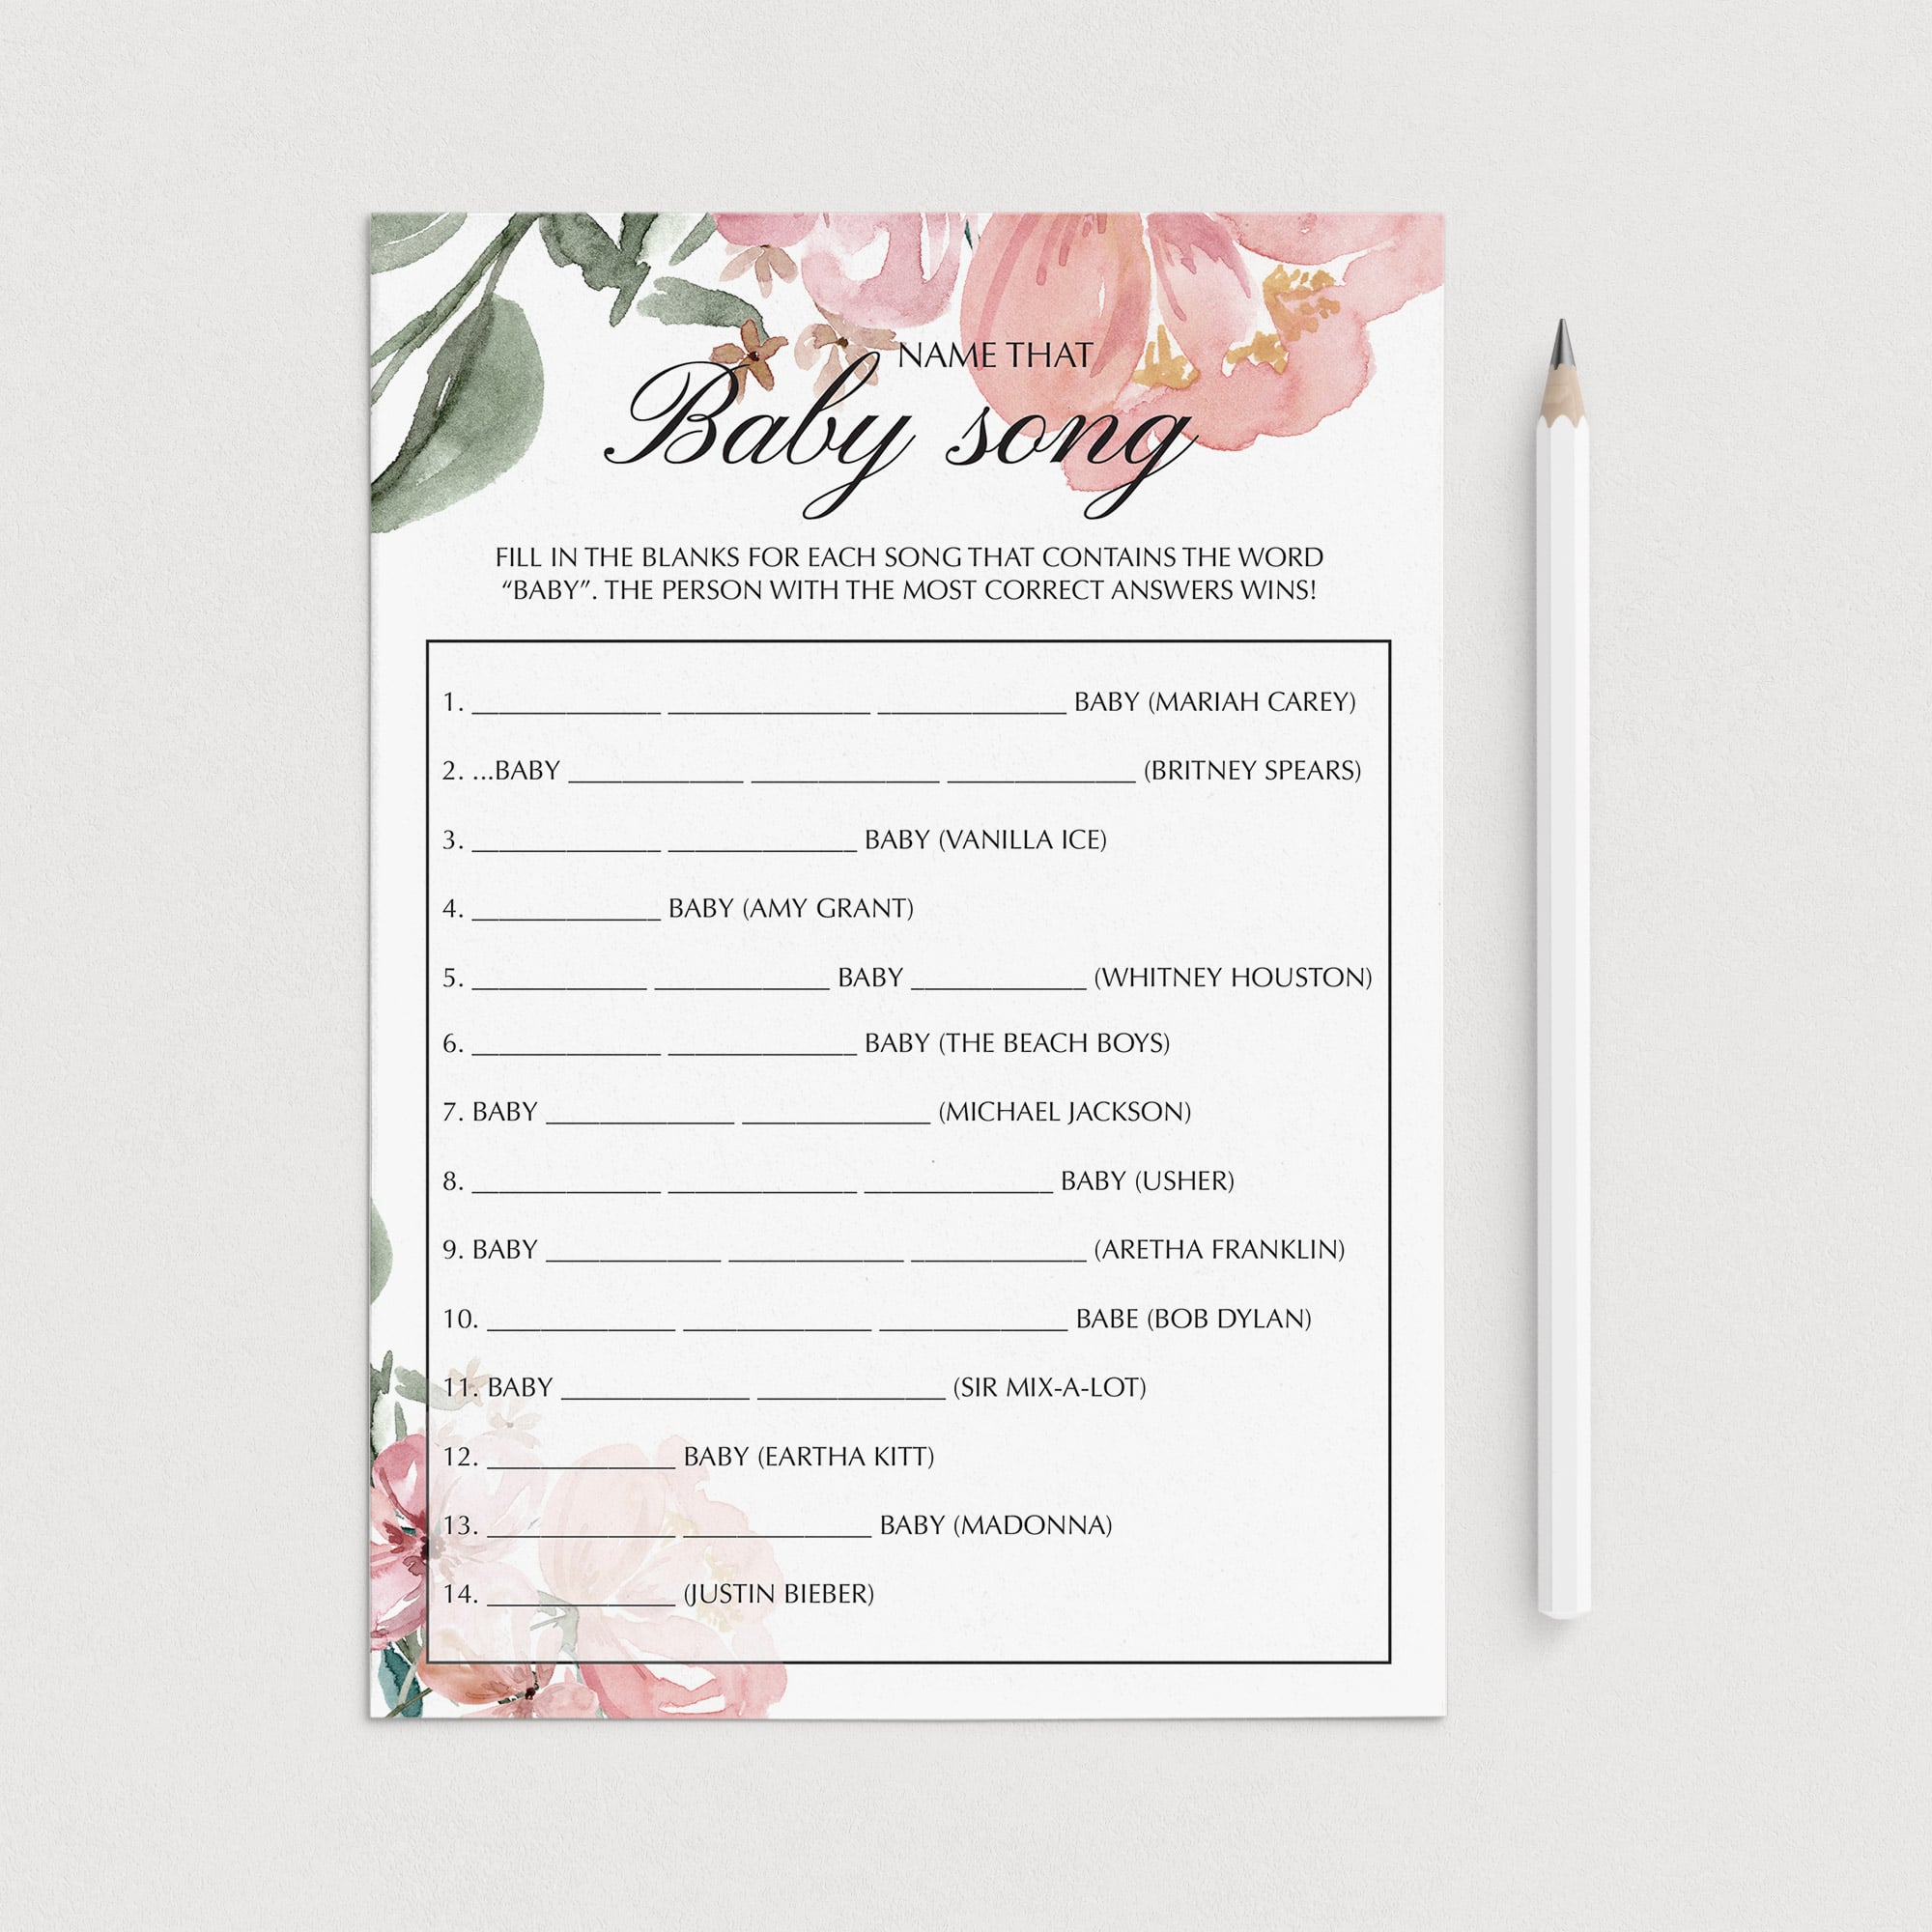 Baby song game printable by LittleSizzle